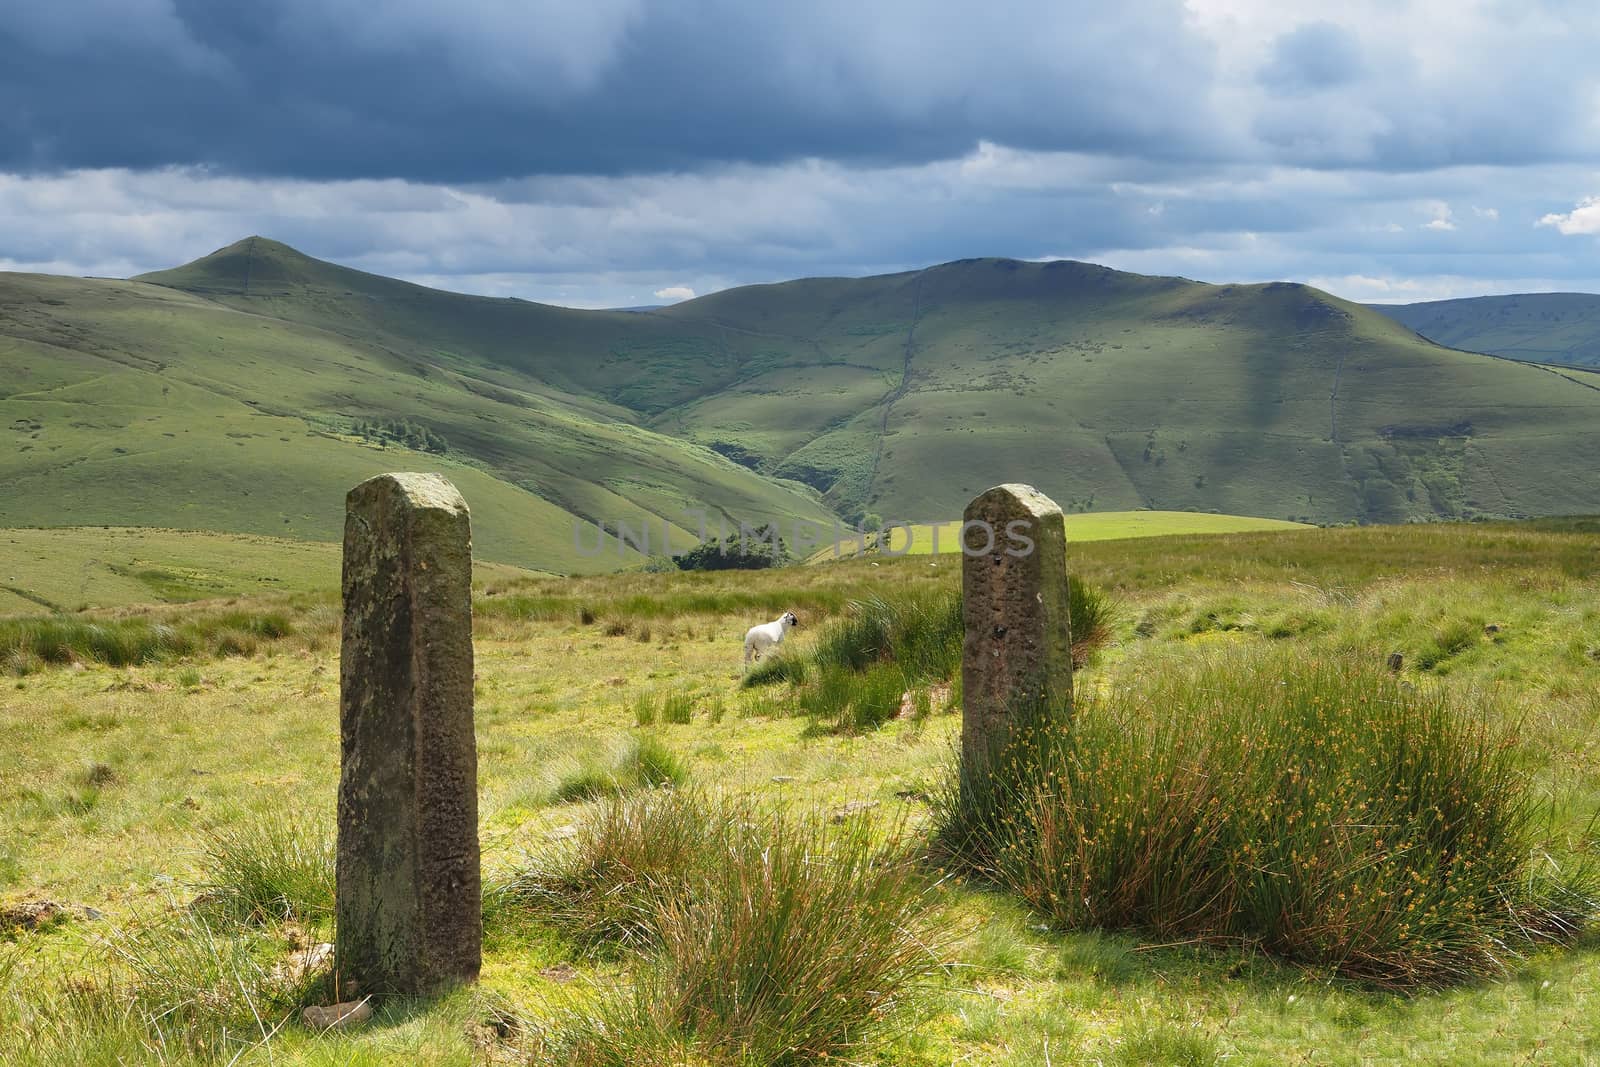 View over sunlit mountains in the Peak District National Park with old rock gate posts in the foreground and dark clouds overhead, UK